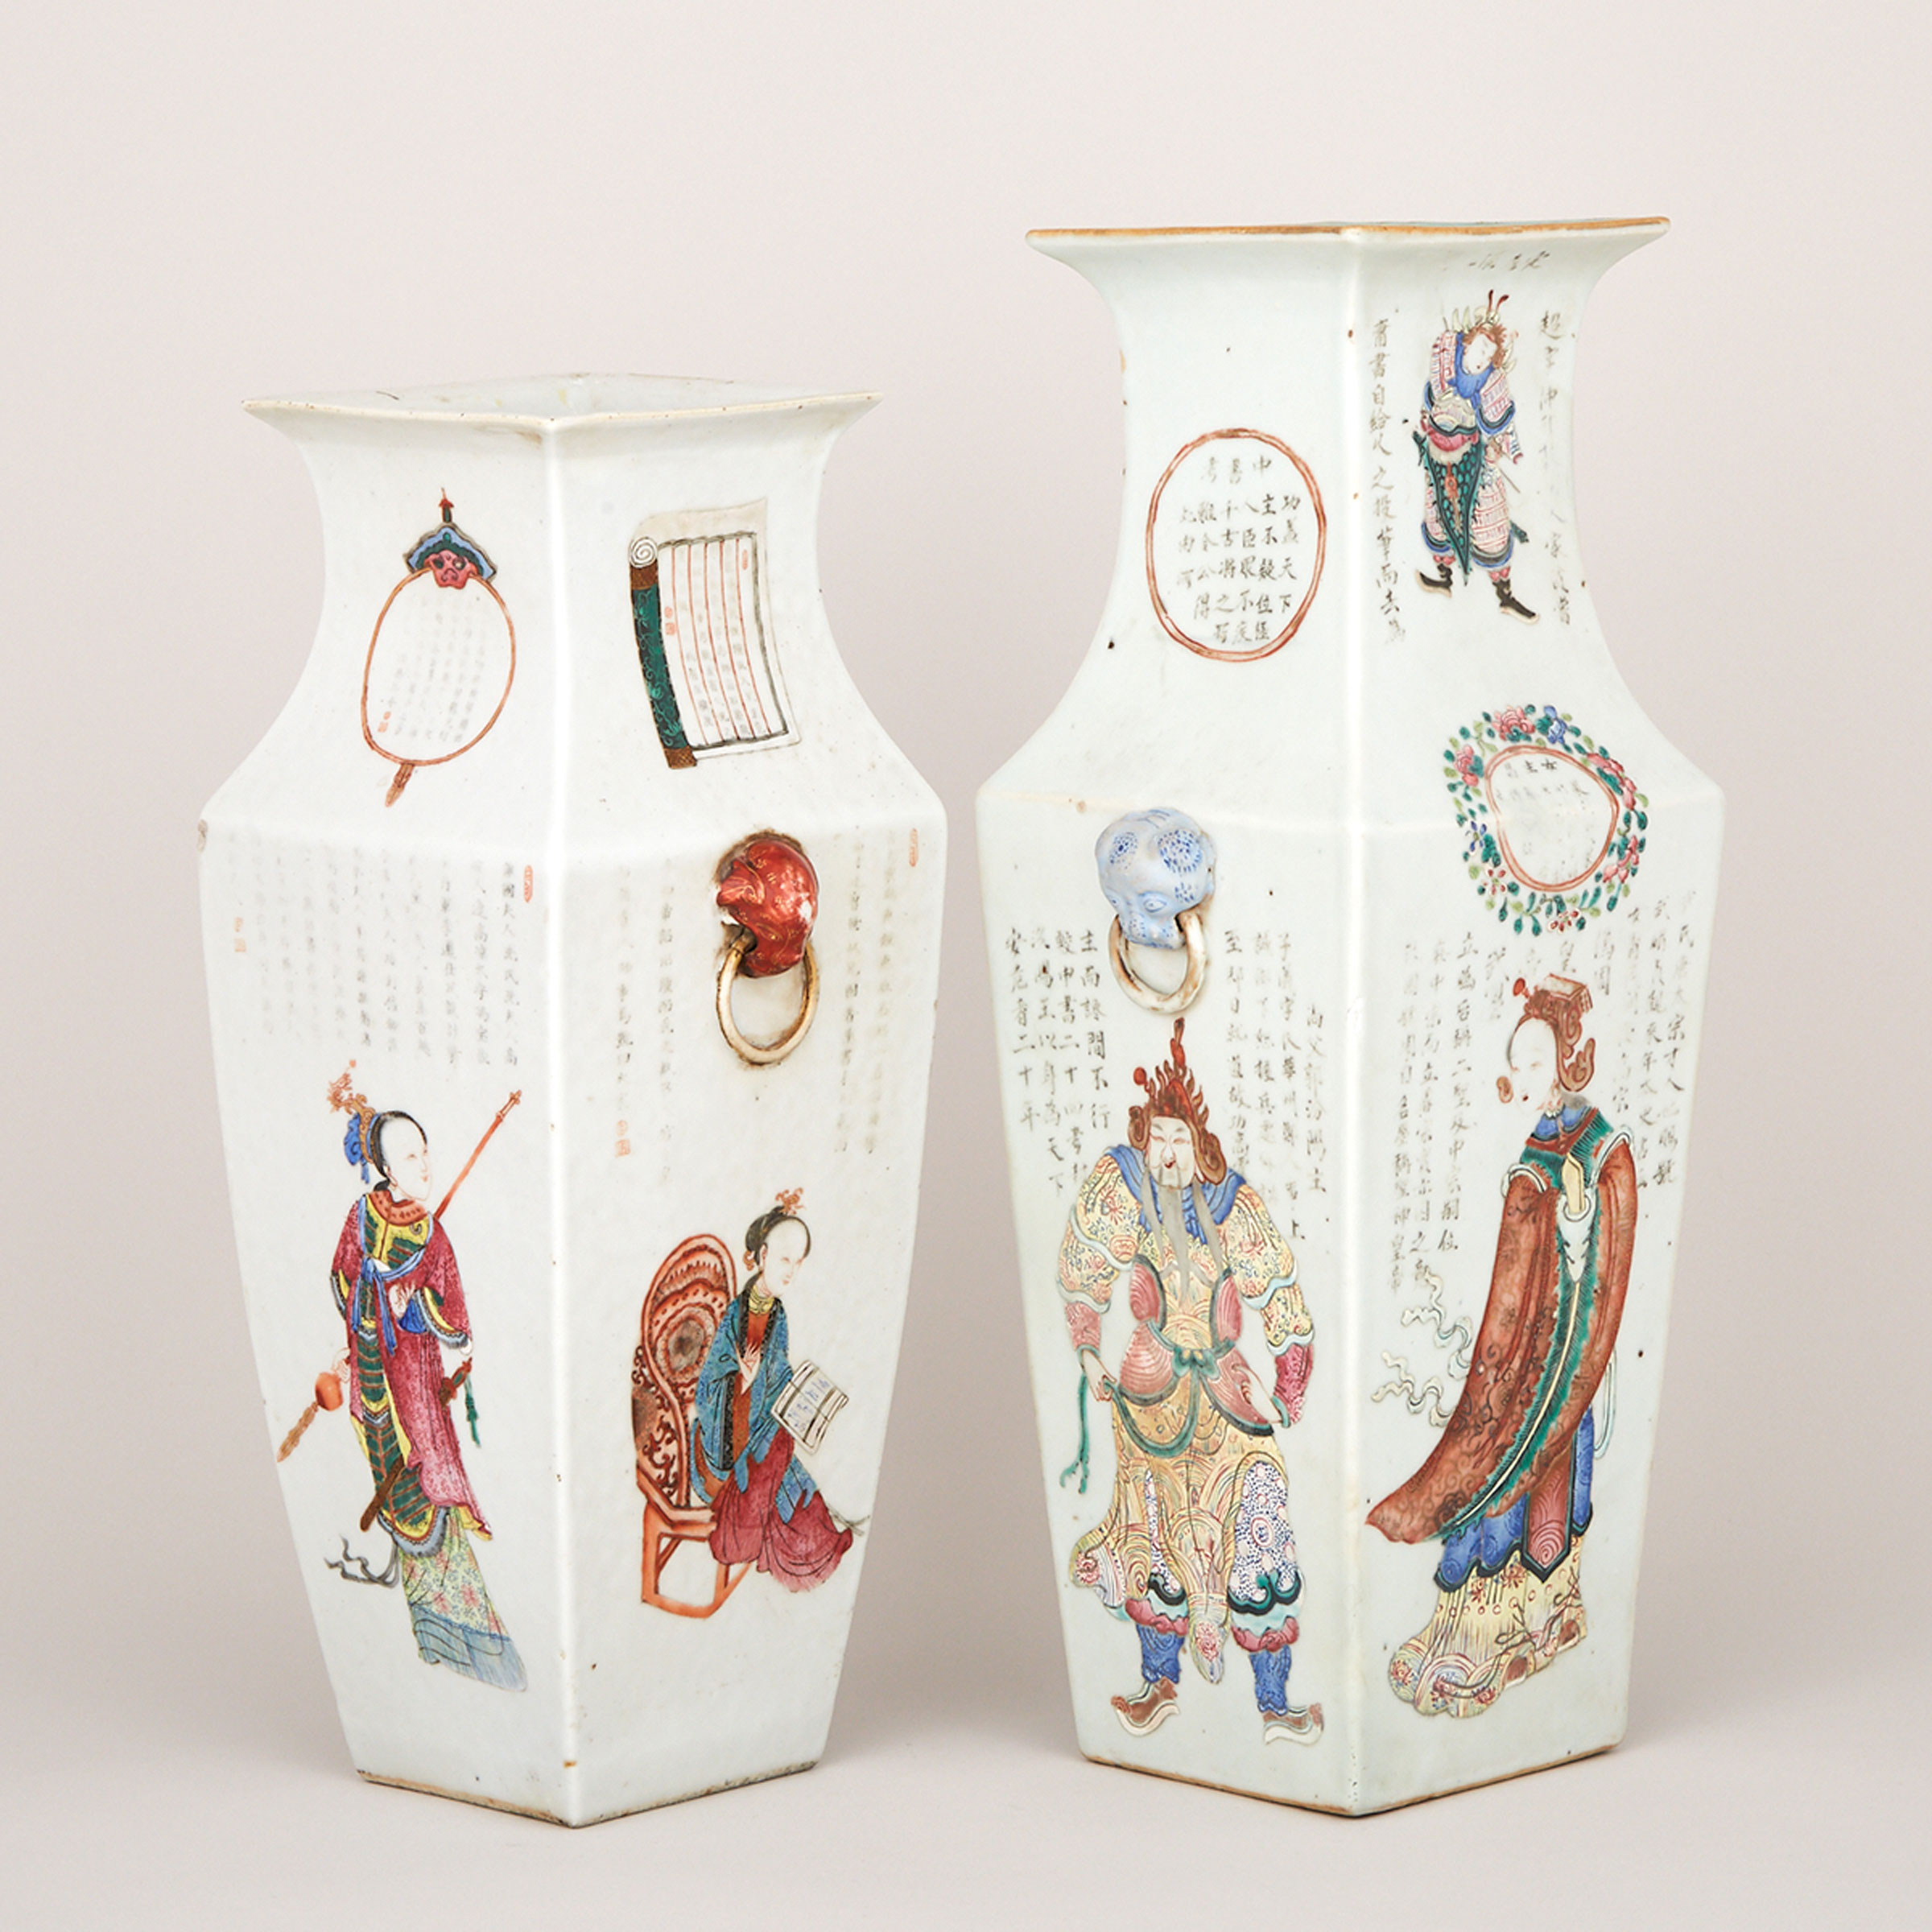 Two Famille Rose Square-Section ‘Wu Shuang Pu’ Vases, Possibly Daoguang Period, 19th Century